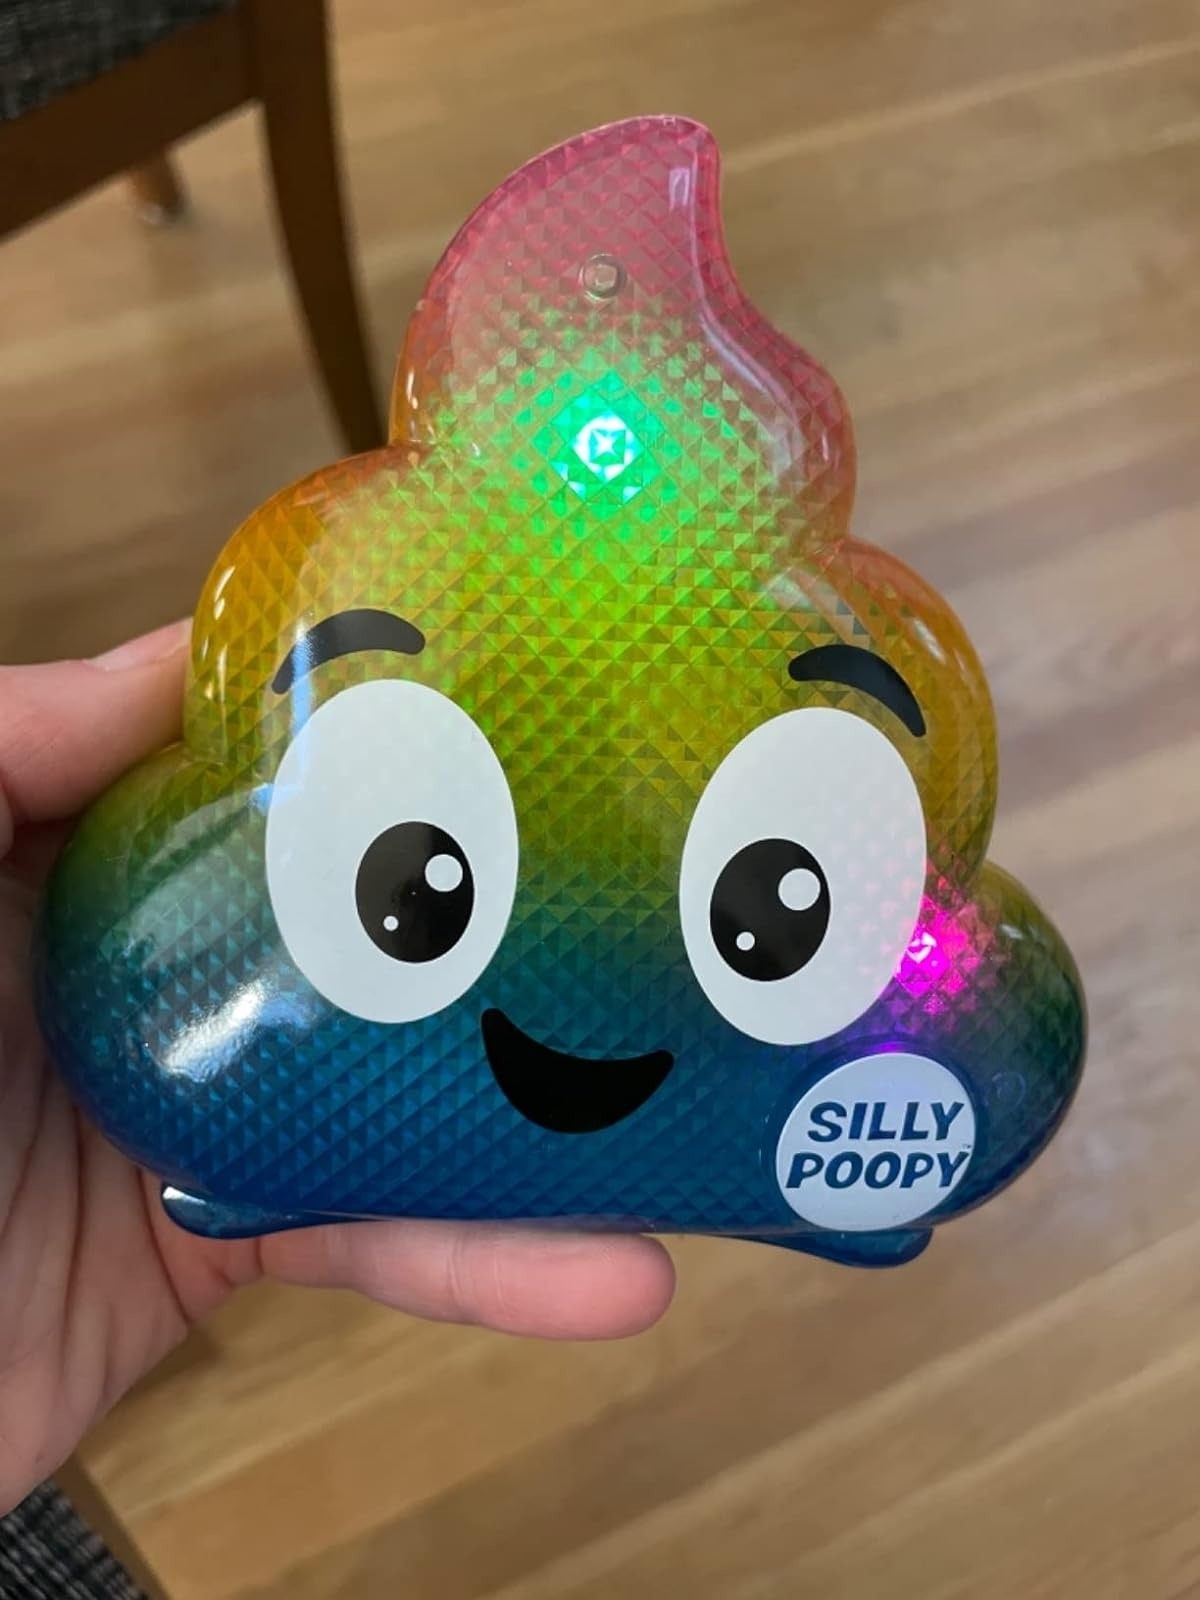 Light up Silly Poopy game